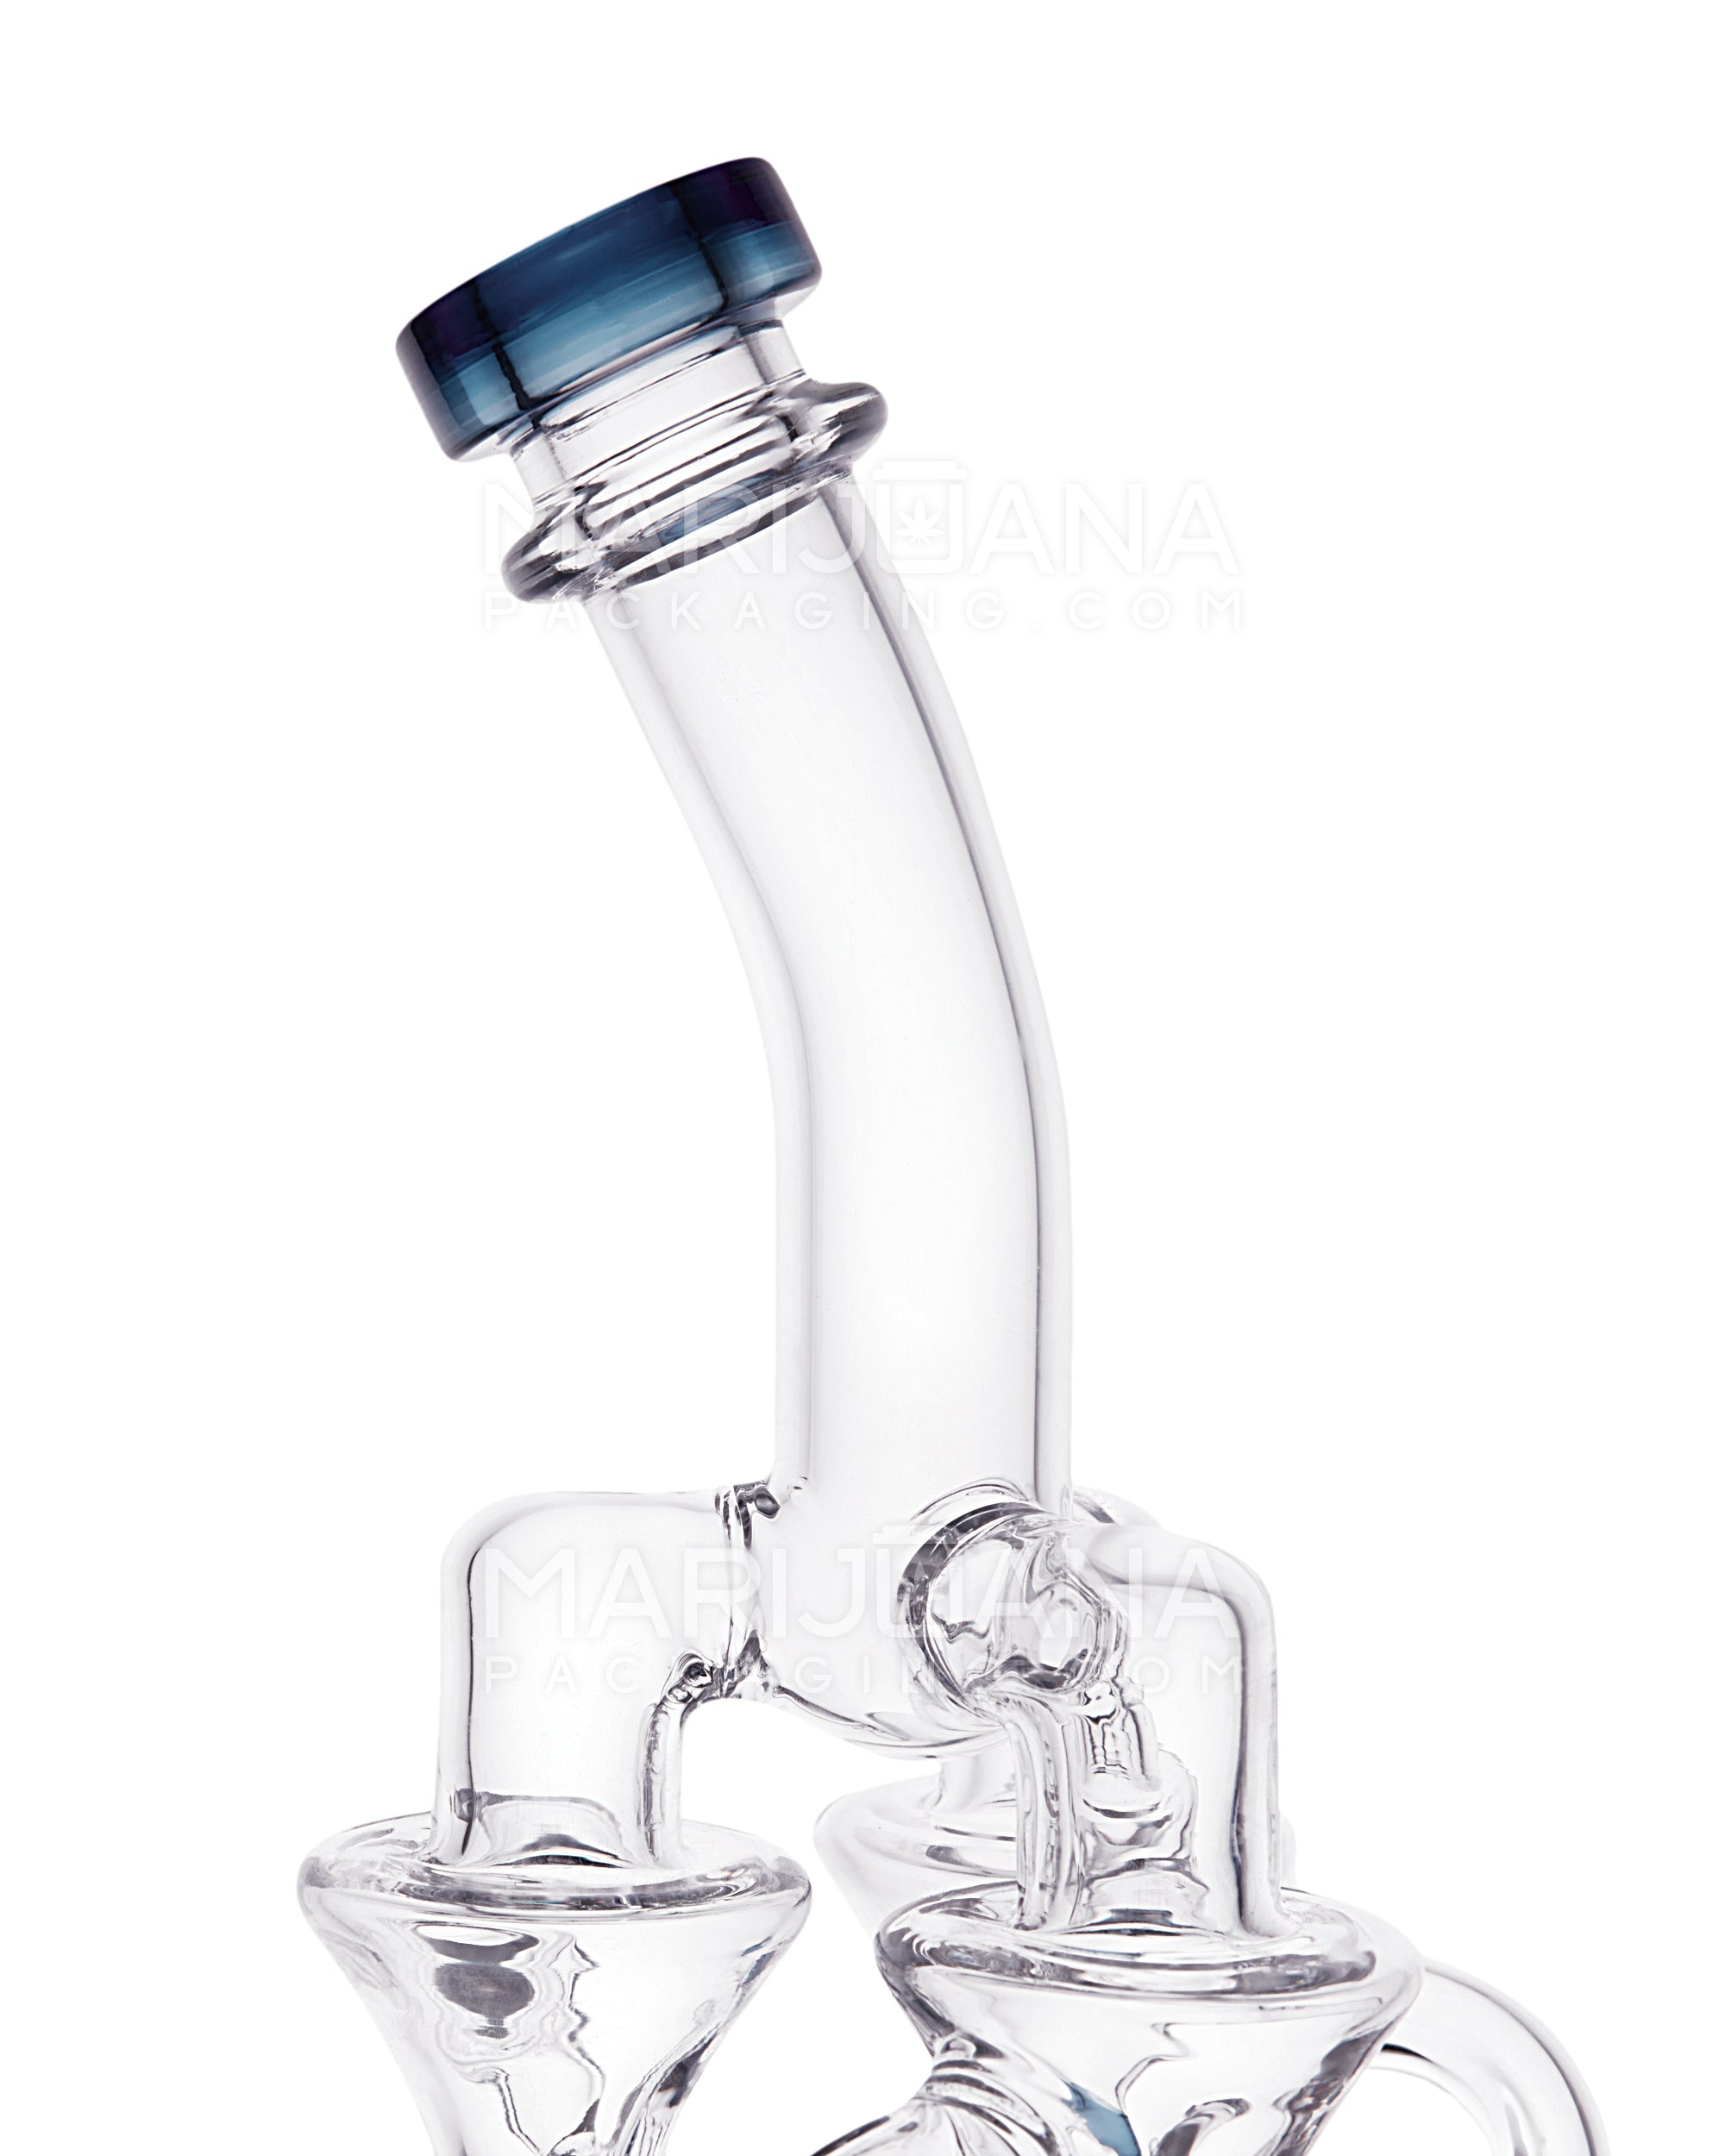 USA Glass | Bent Neck Inline Perc Six Recycler Pillar Tower Water Pipe w/ Thick Base | 14.5in Tall - 14mm Bowl - Teal